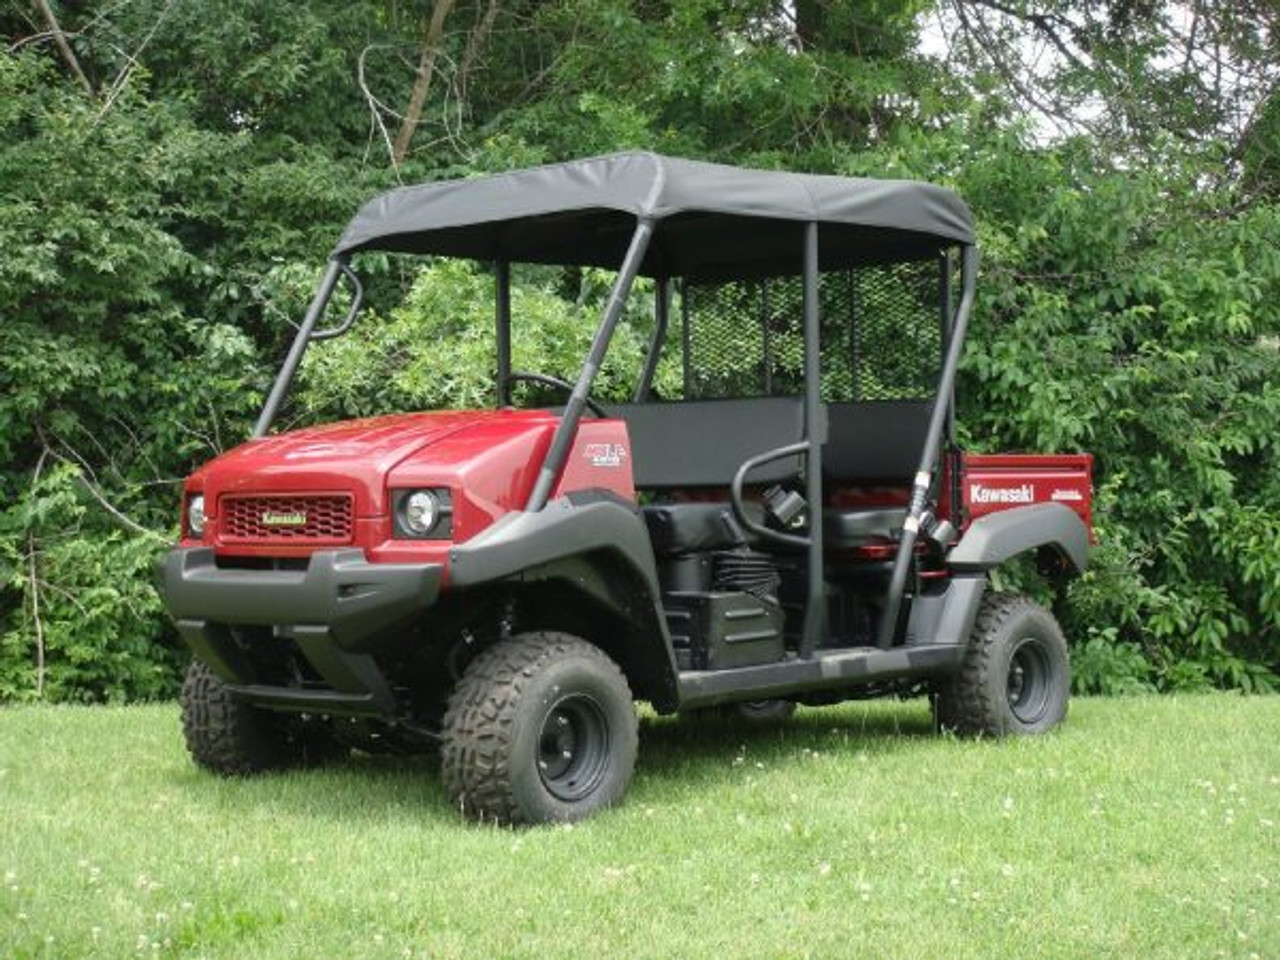 3 Star side x side Kawasaki Mule 4000/4010 trans soft top side and front angle view